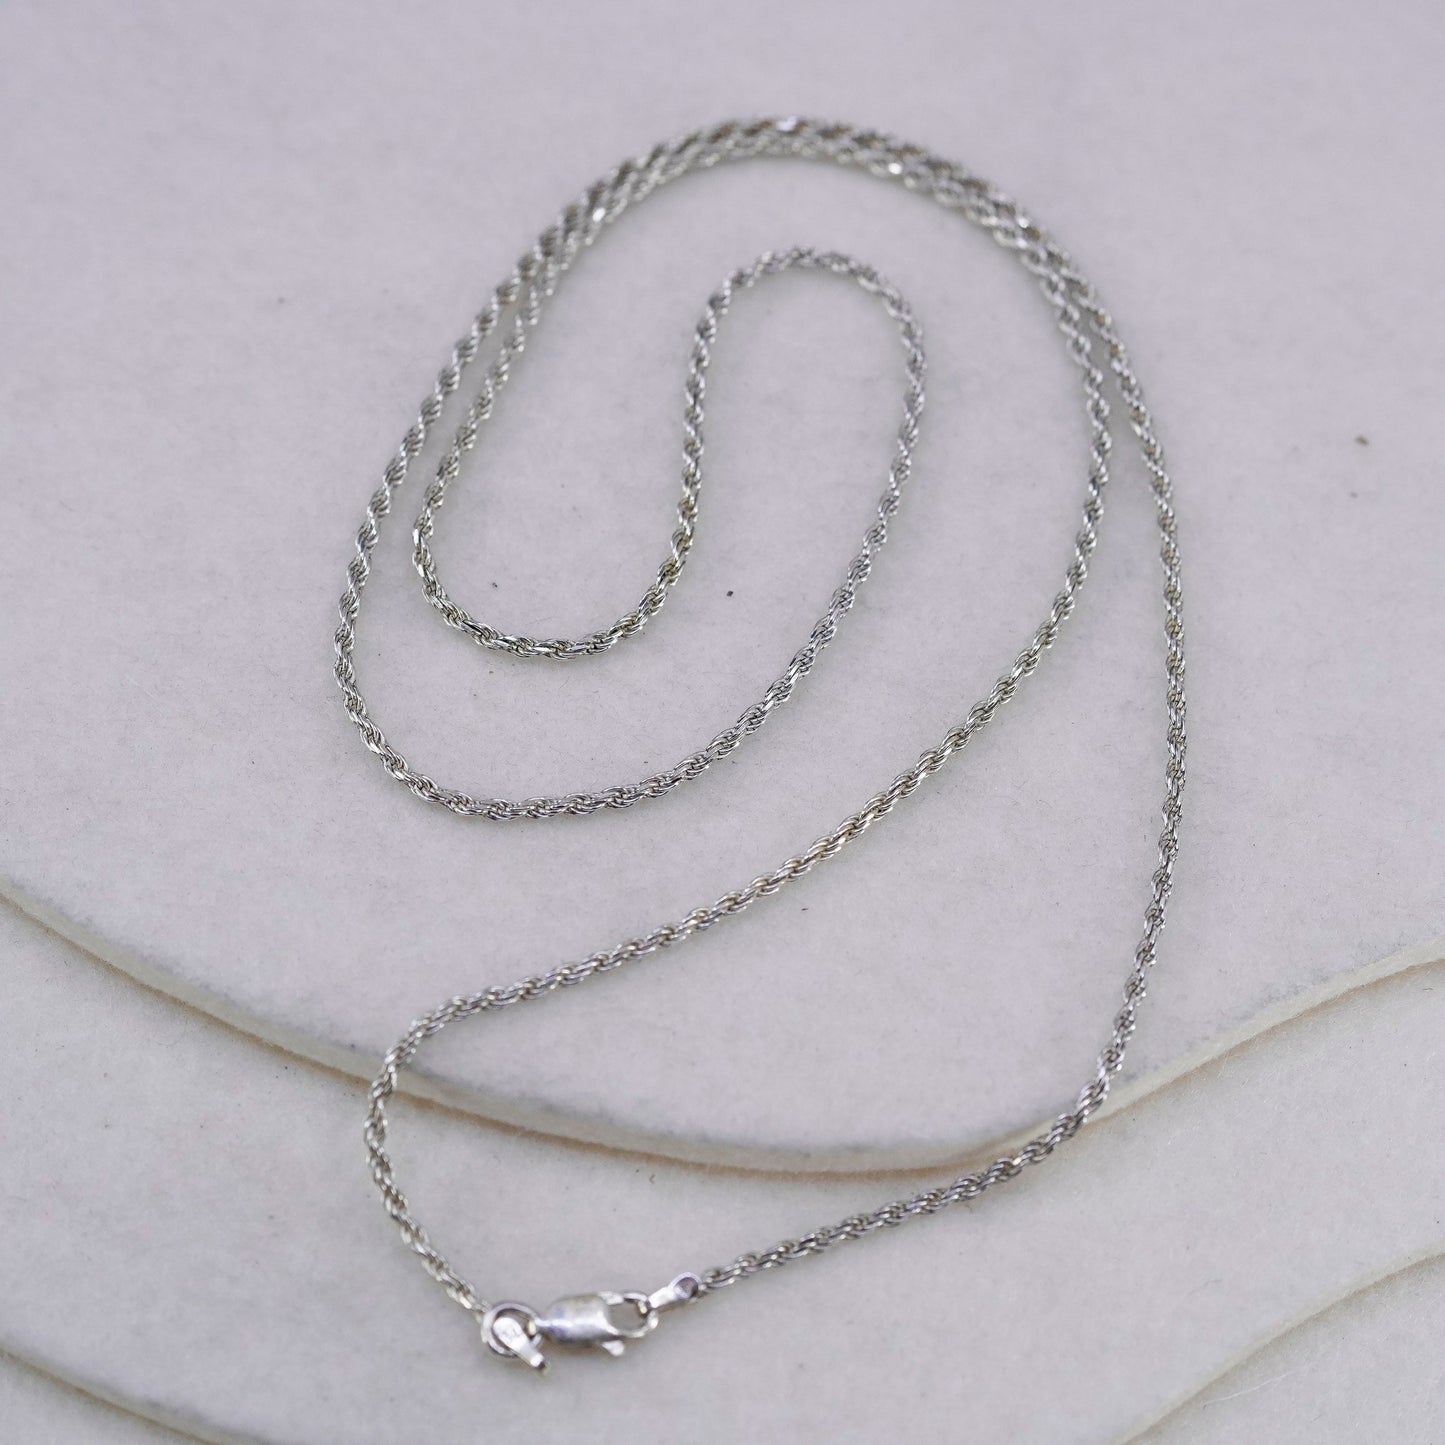 24” 2mm, vintage Sterling 925 silver rope chain necklace